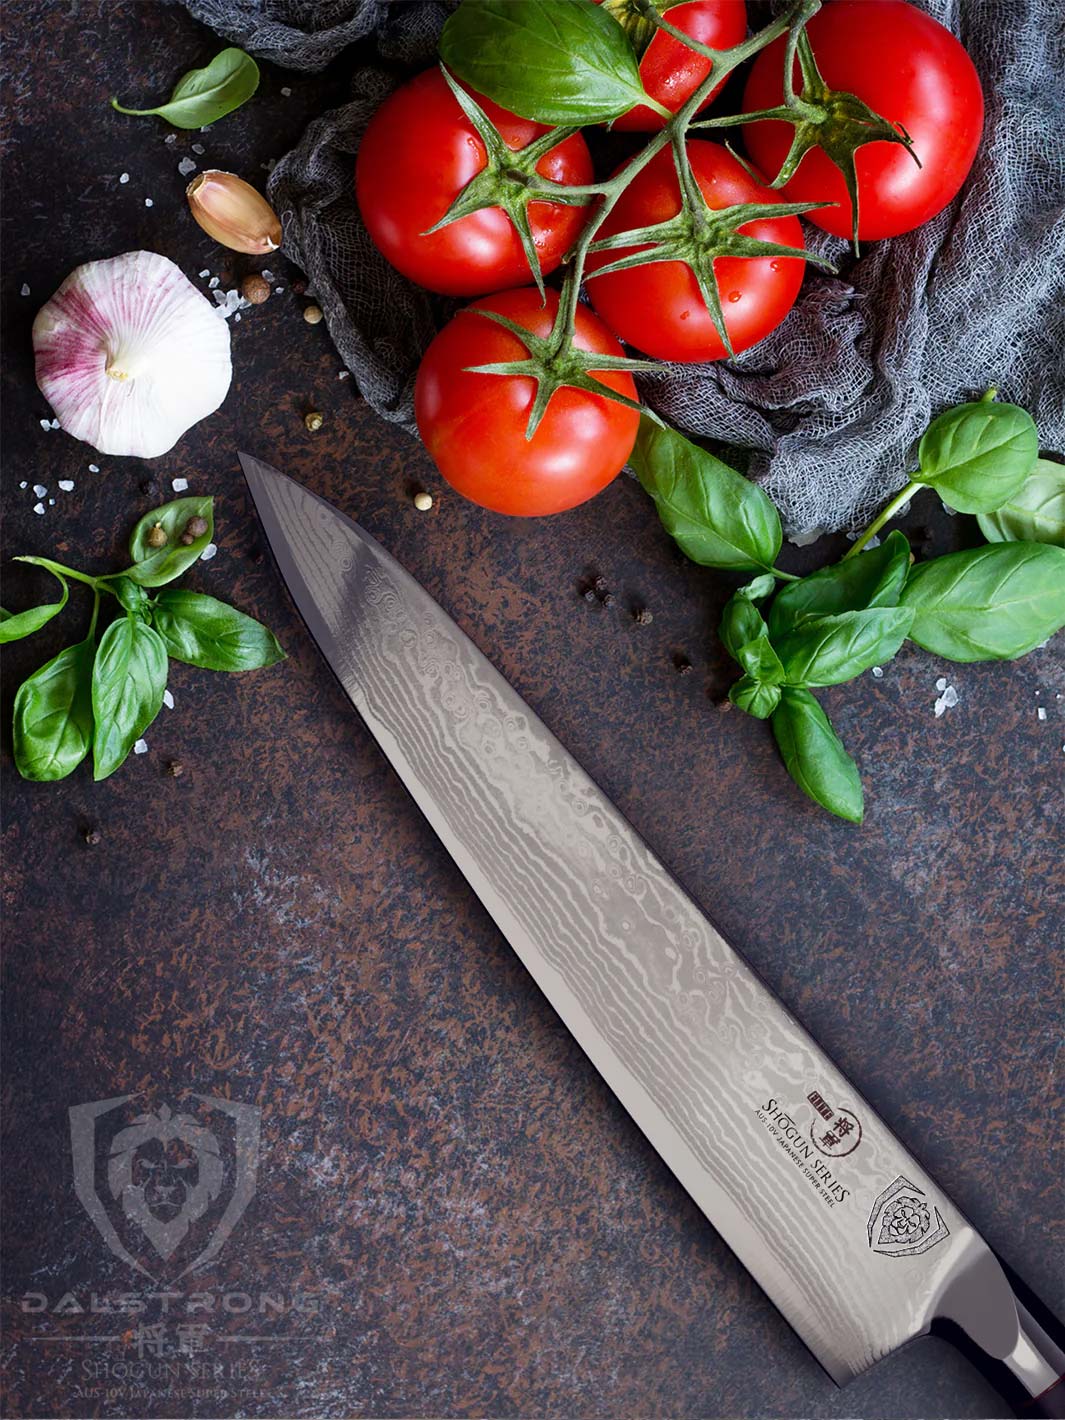 Dalstrong shogun series 9.5 inch chef knife with black handle and tomatoes on top.